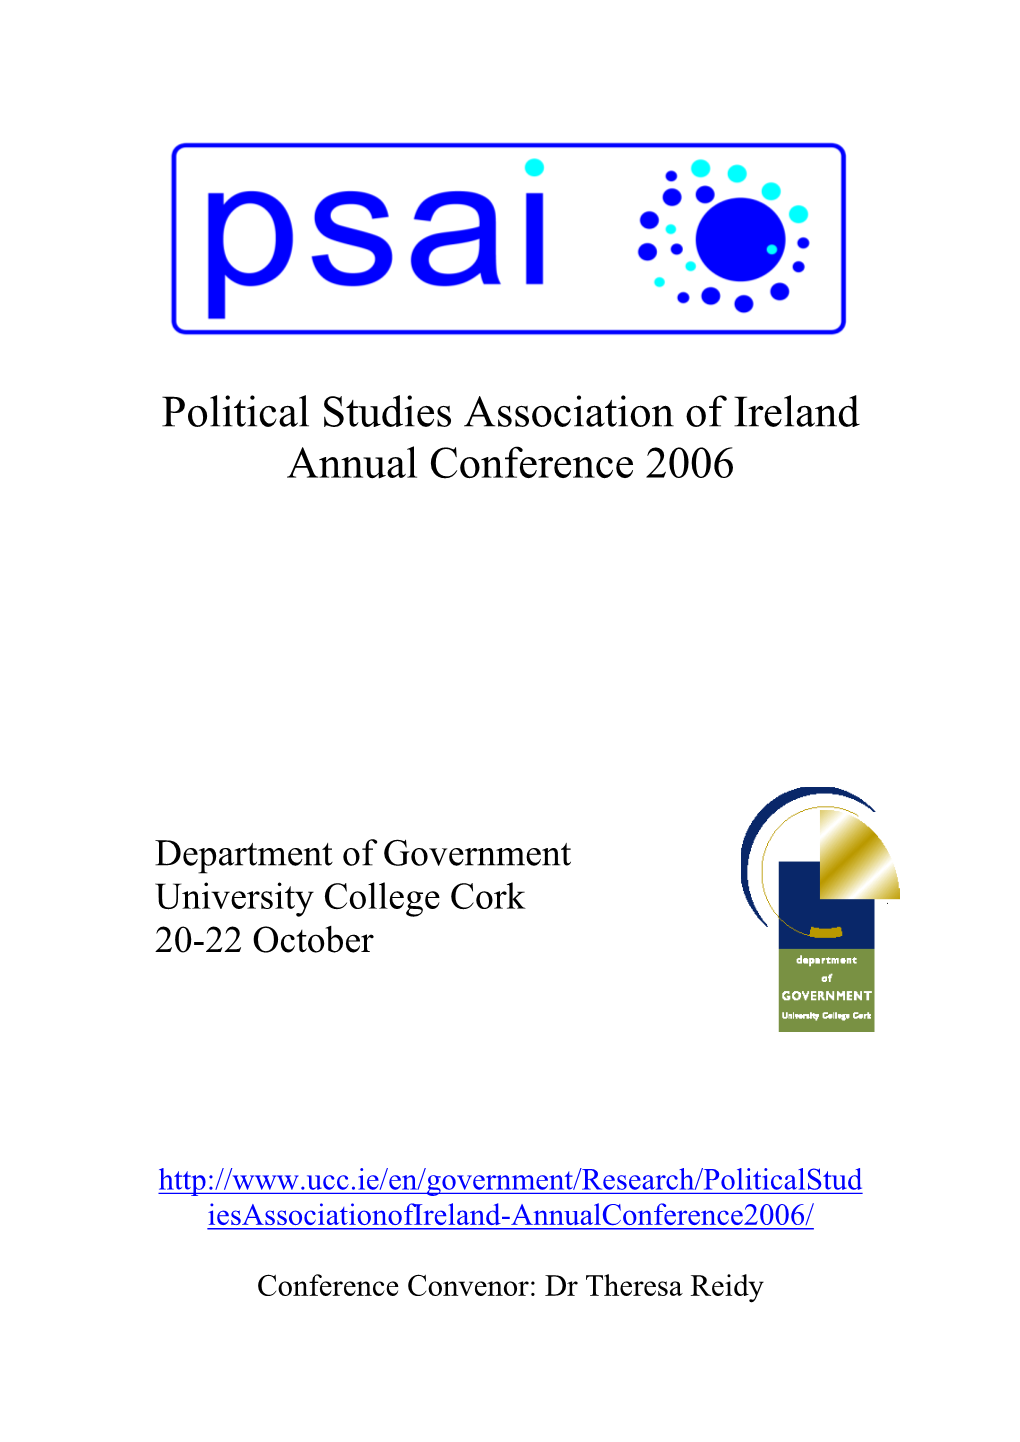 Political Studies Association of Ireland Annual Conference 2006